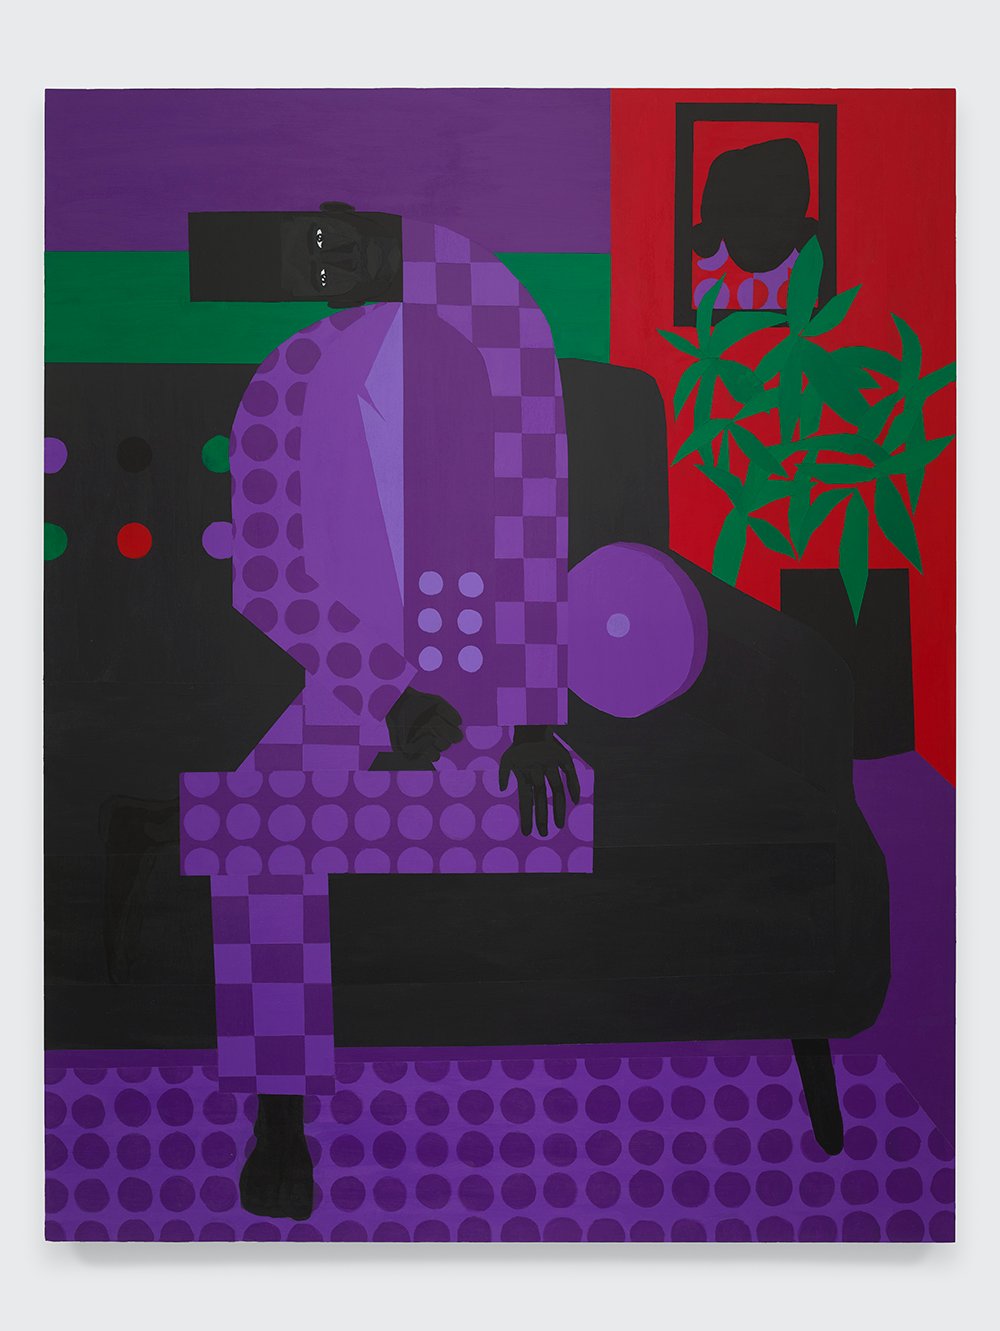 Jon Key, The Man in the Violet Suit No. 15 (Living Room), 2020